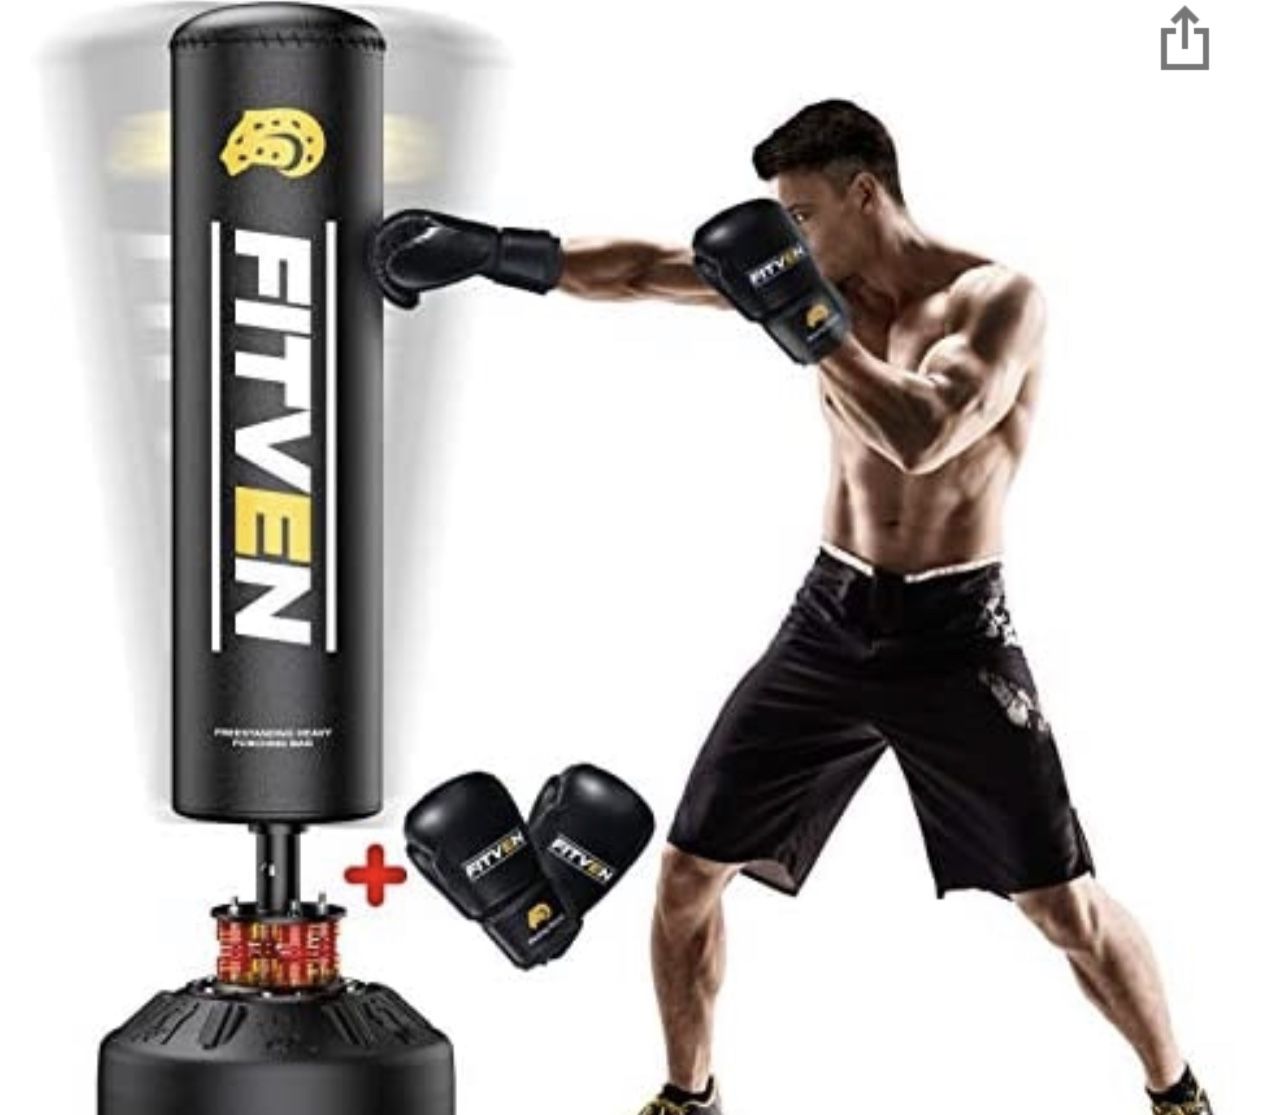 FITVEN Freestanding Punching Bag 70''-205lbs with Boxing Gloves Heavy Boxing Bag with Suction Cup Base for Adult Youth Kids - Men Stand Kickboxing Bag